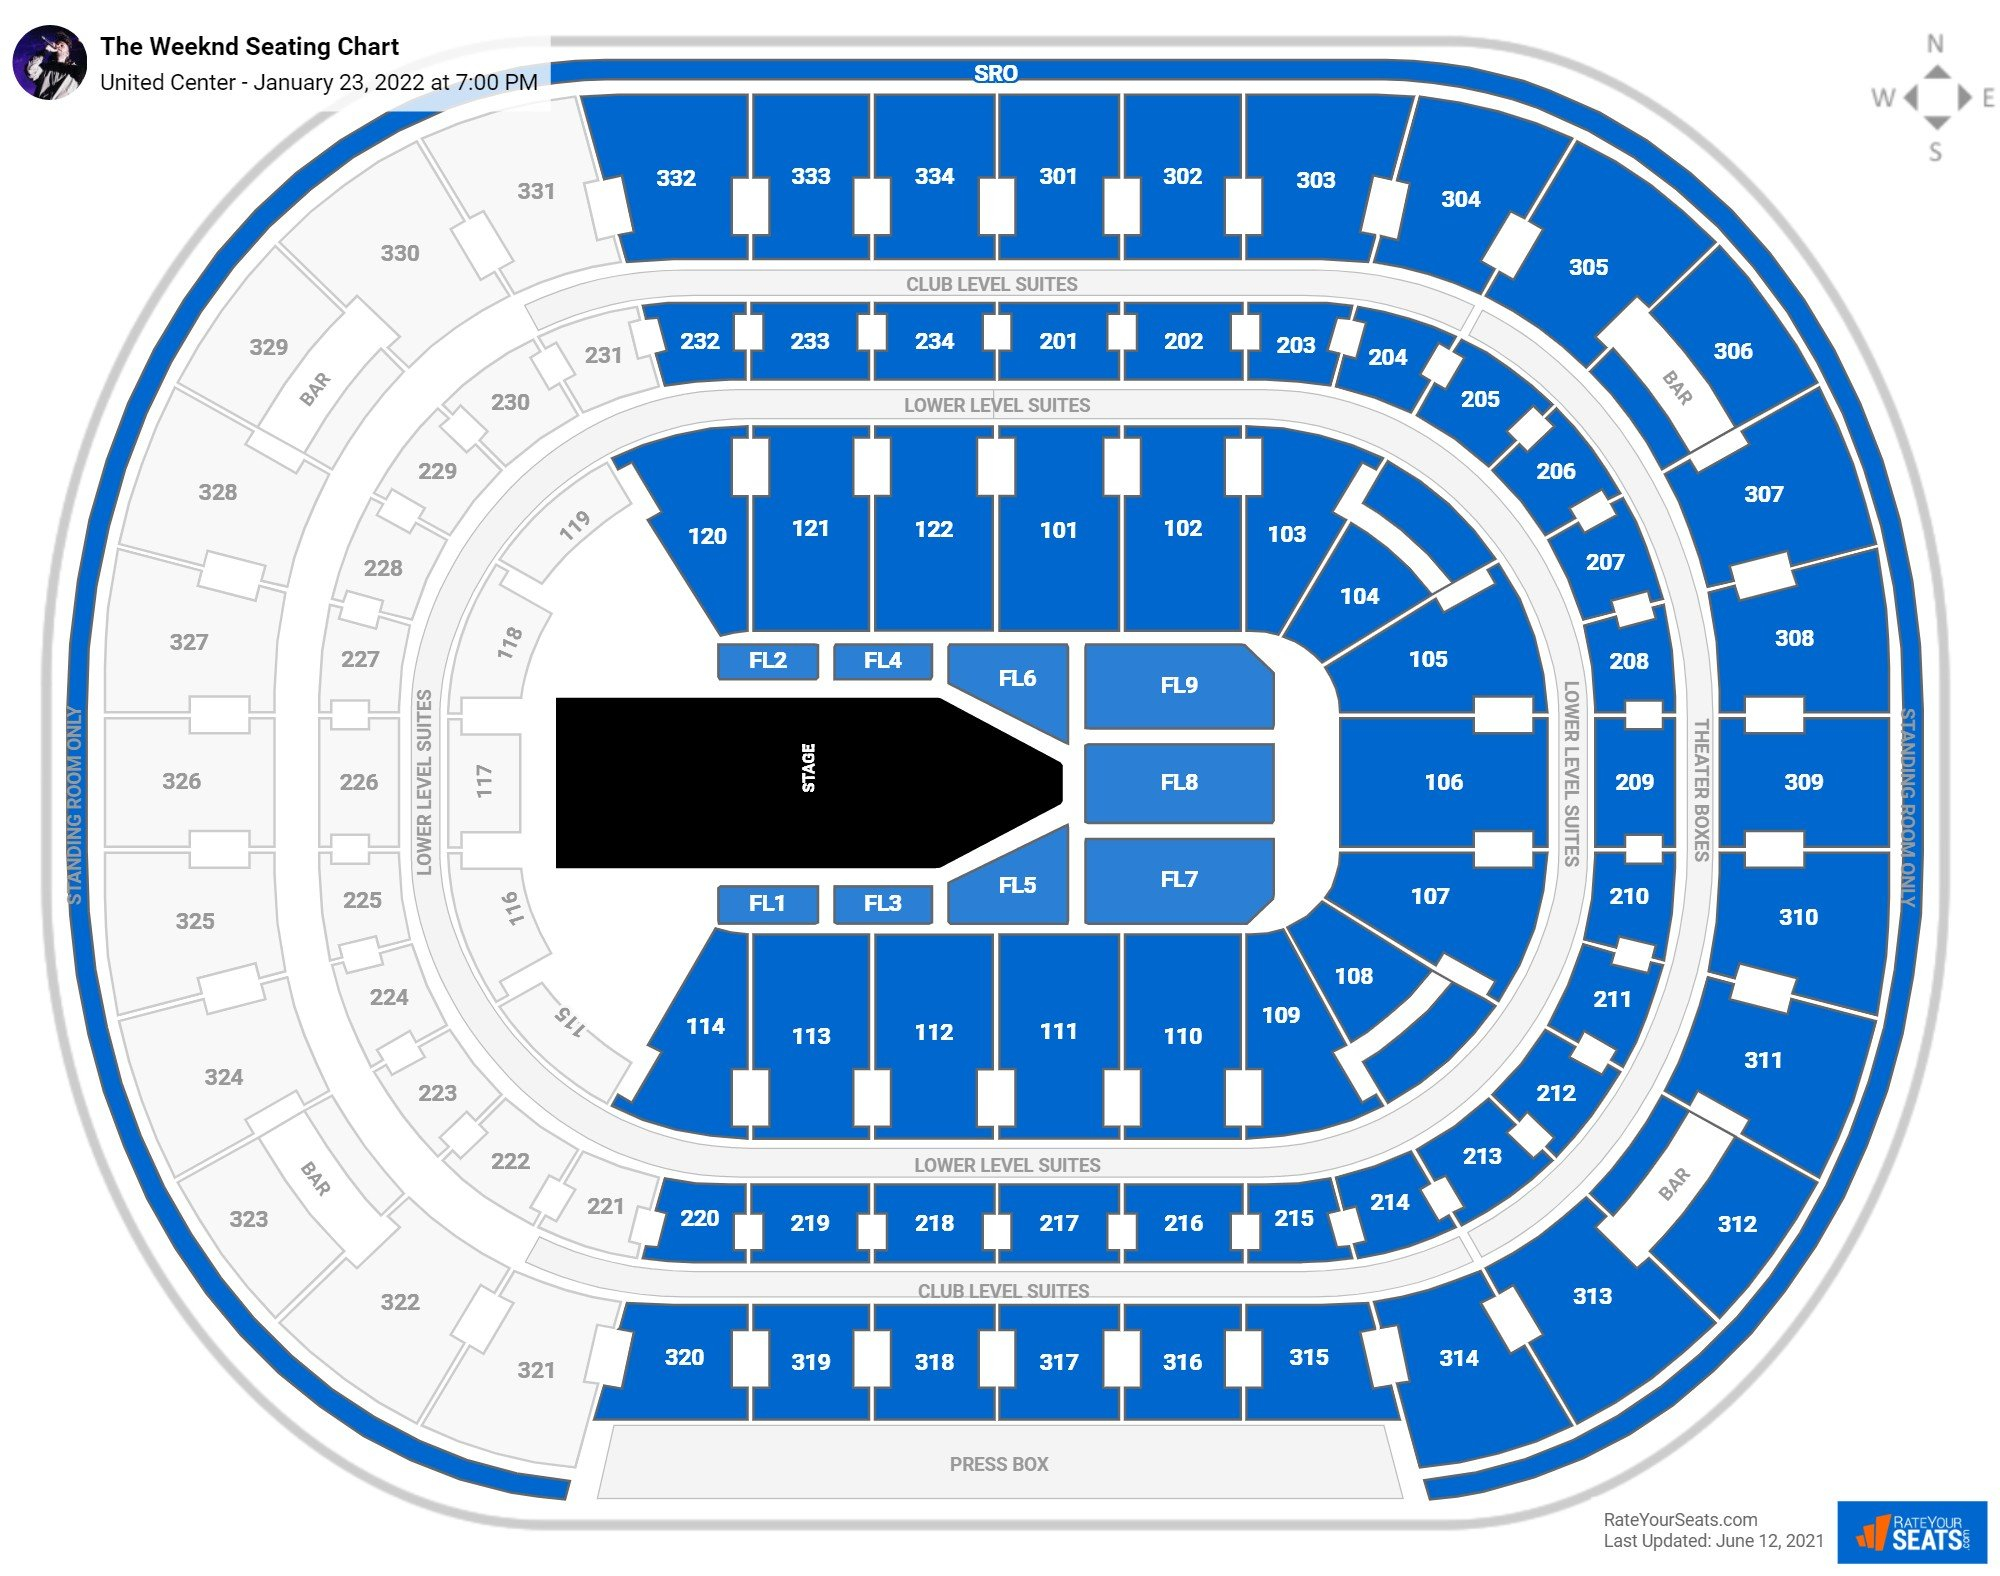 United Center Seating Charts For Concerts RateYourSeats